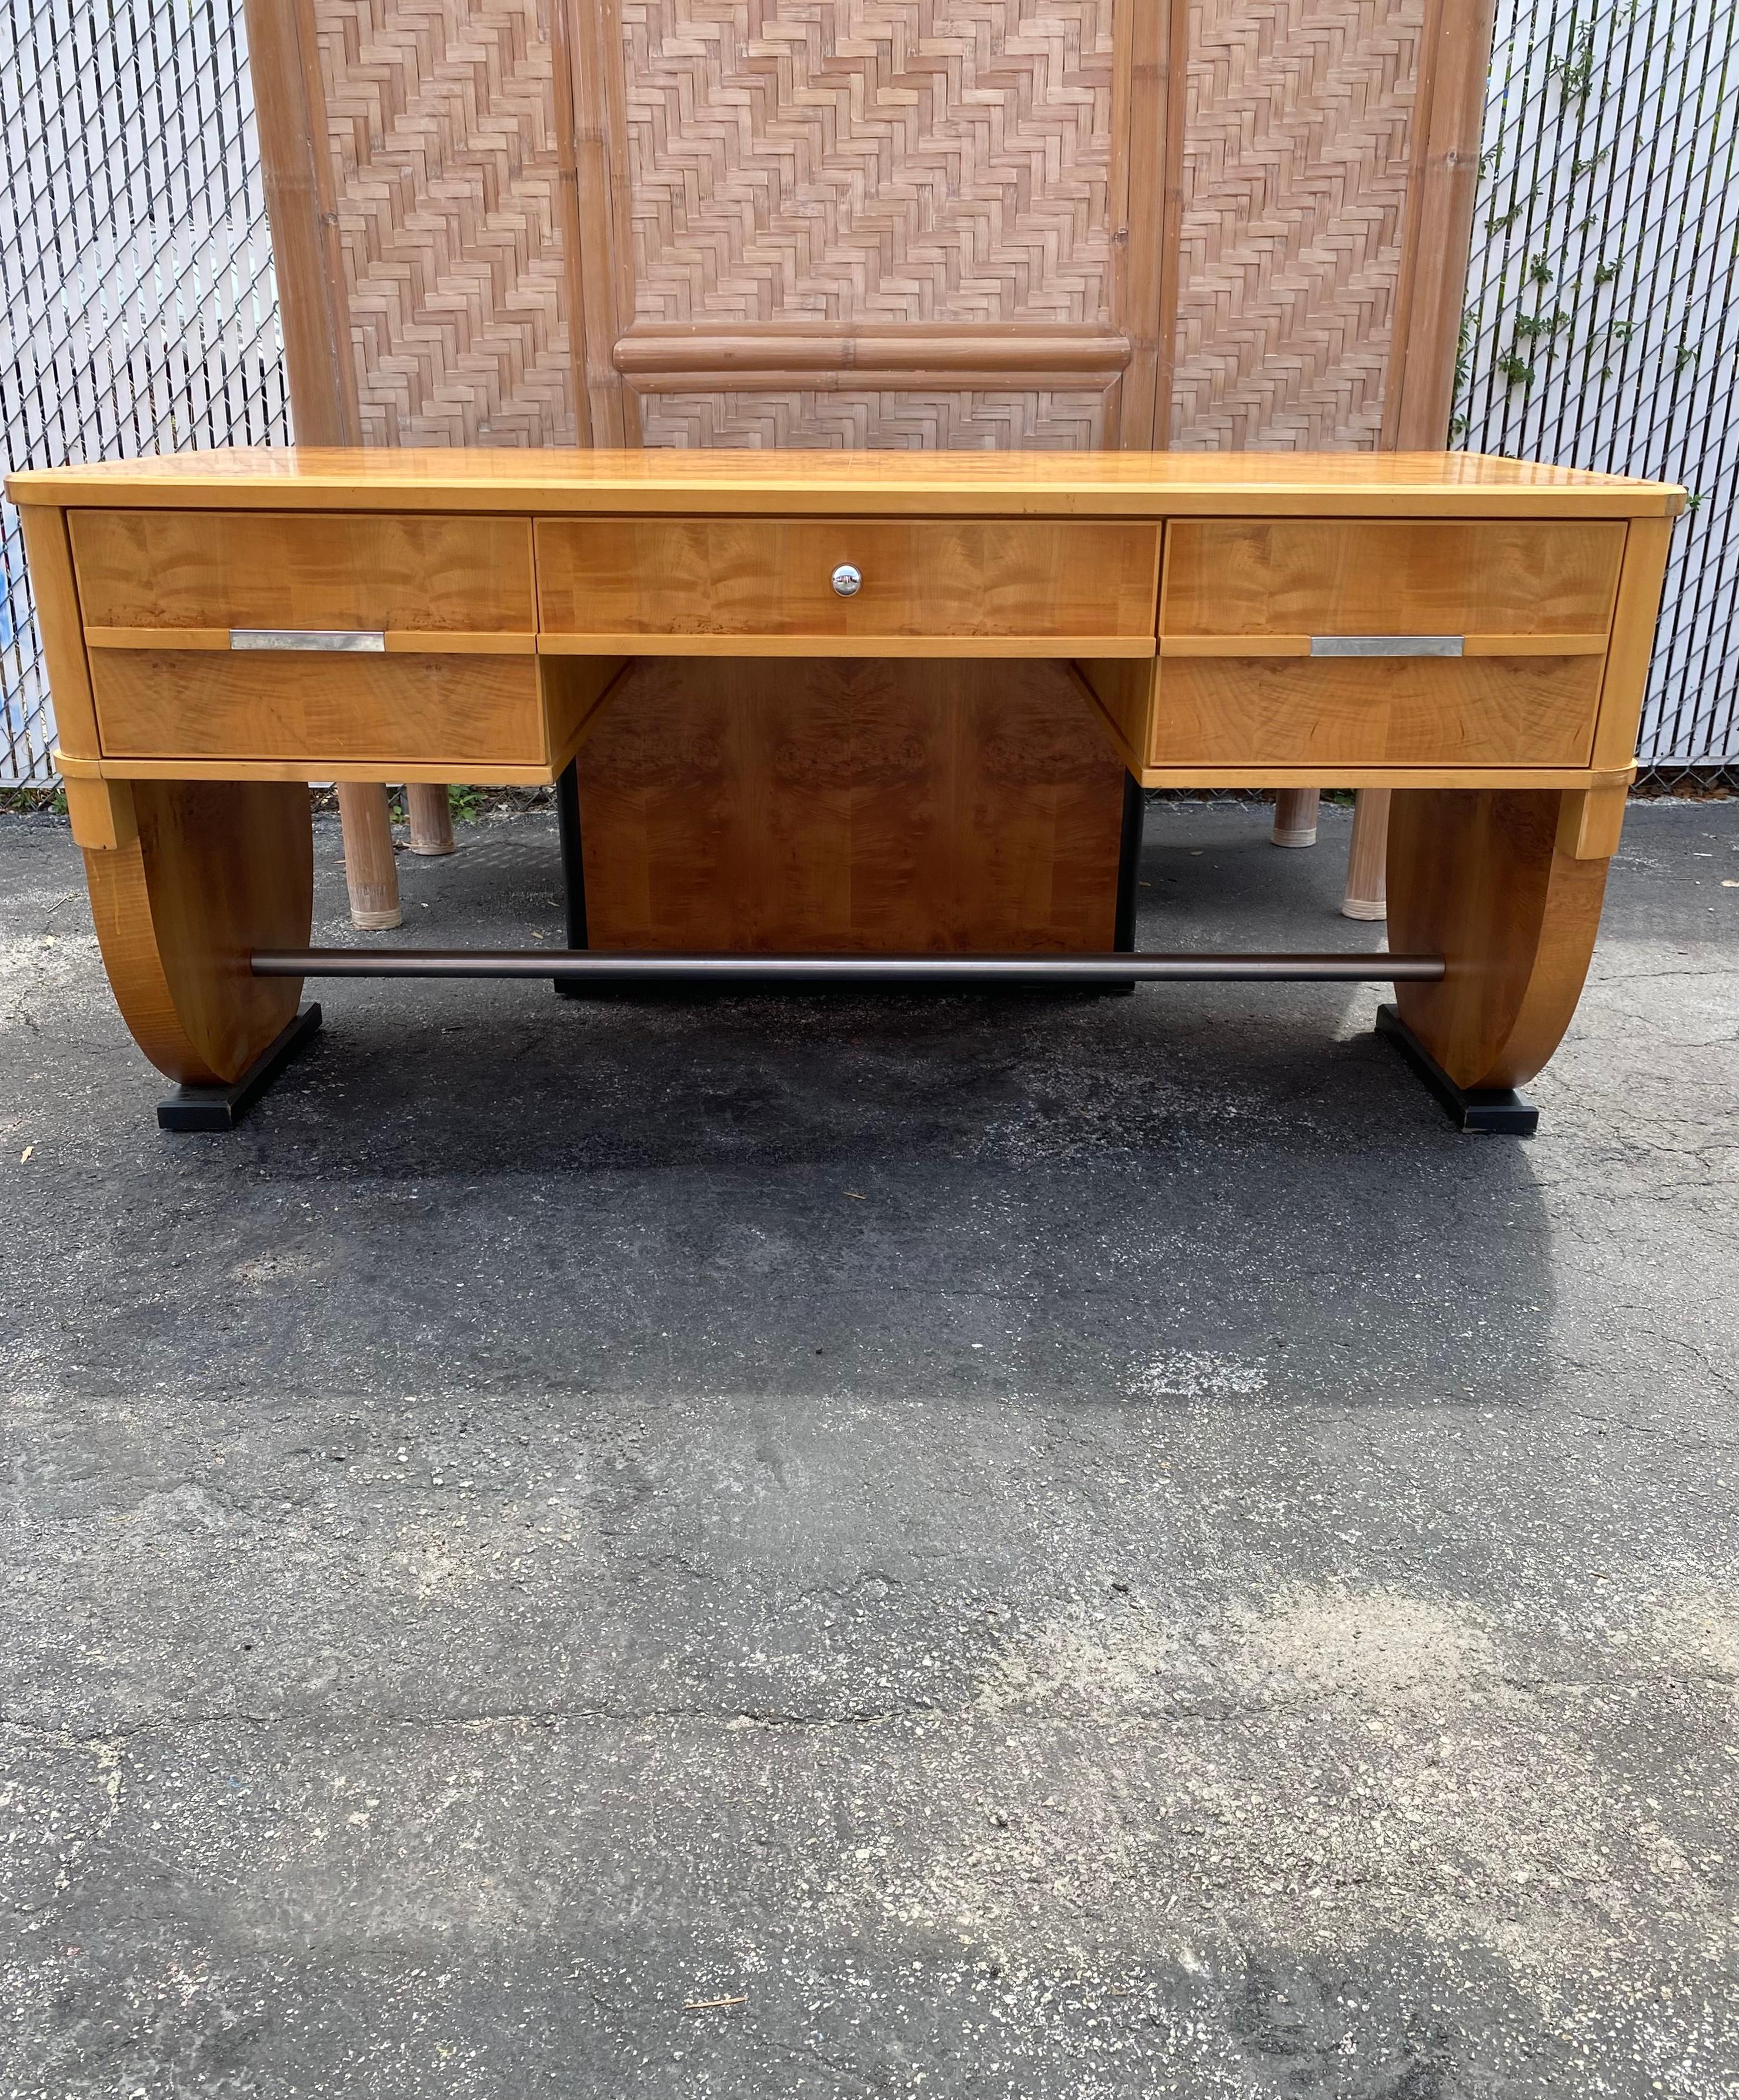 On offer on this occasion is one of the most stunning and one of a kind, sculptural Burlwood solid wood desk you could hope to find. Outstanding design is exhibited throughout. Chrome hardware. The beautiful desk is statement piece and packed with